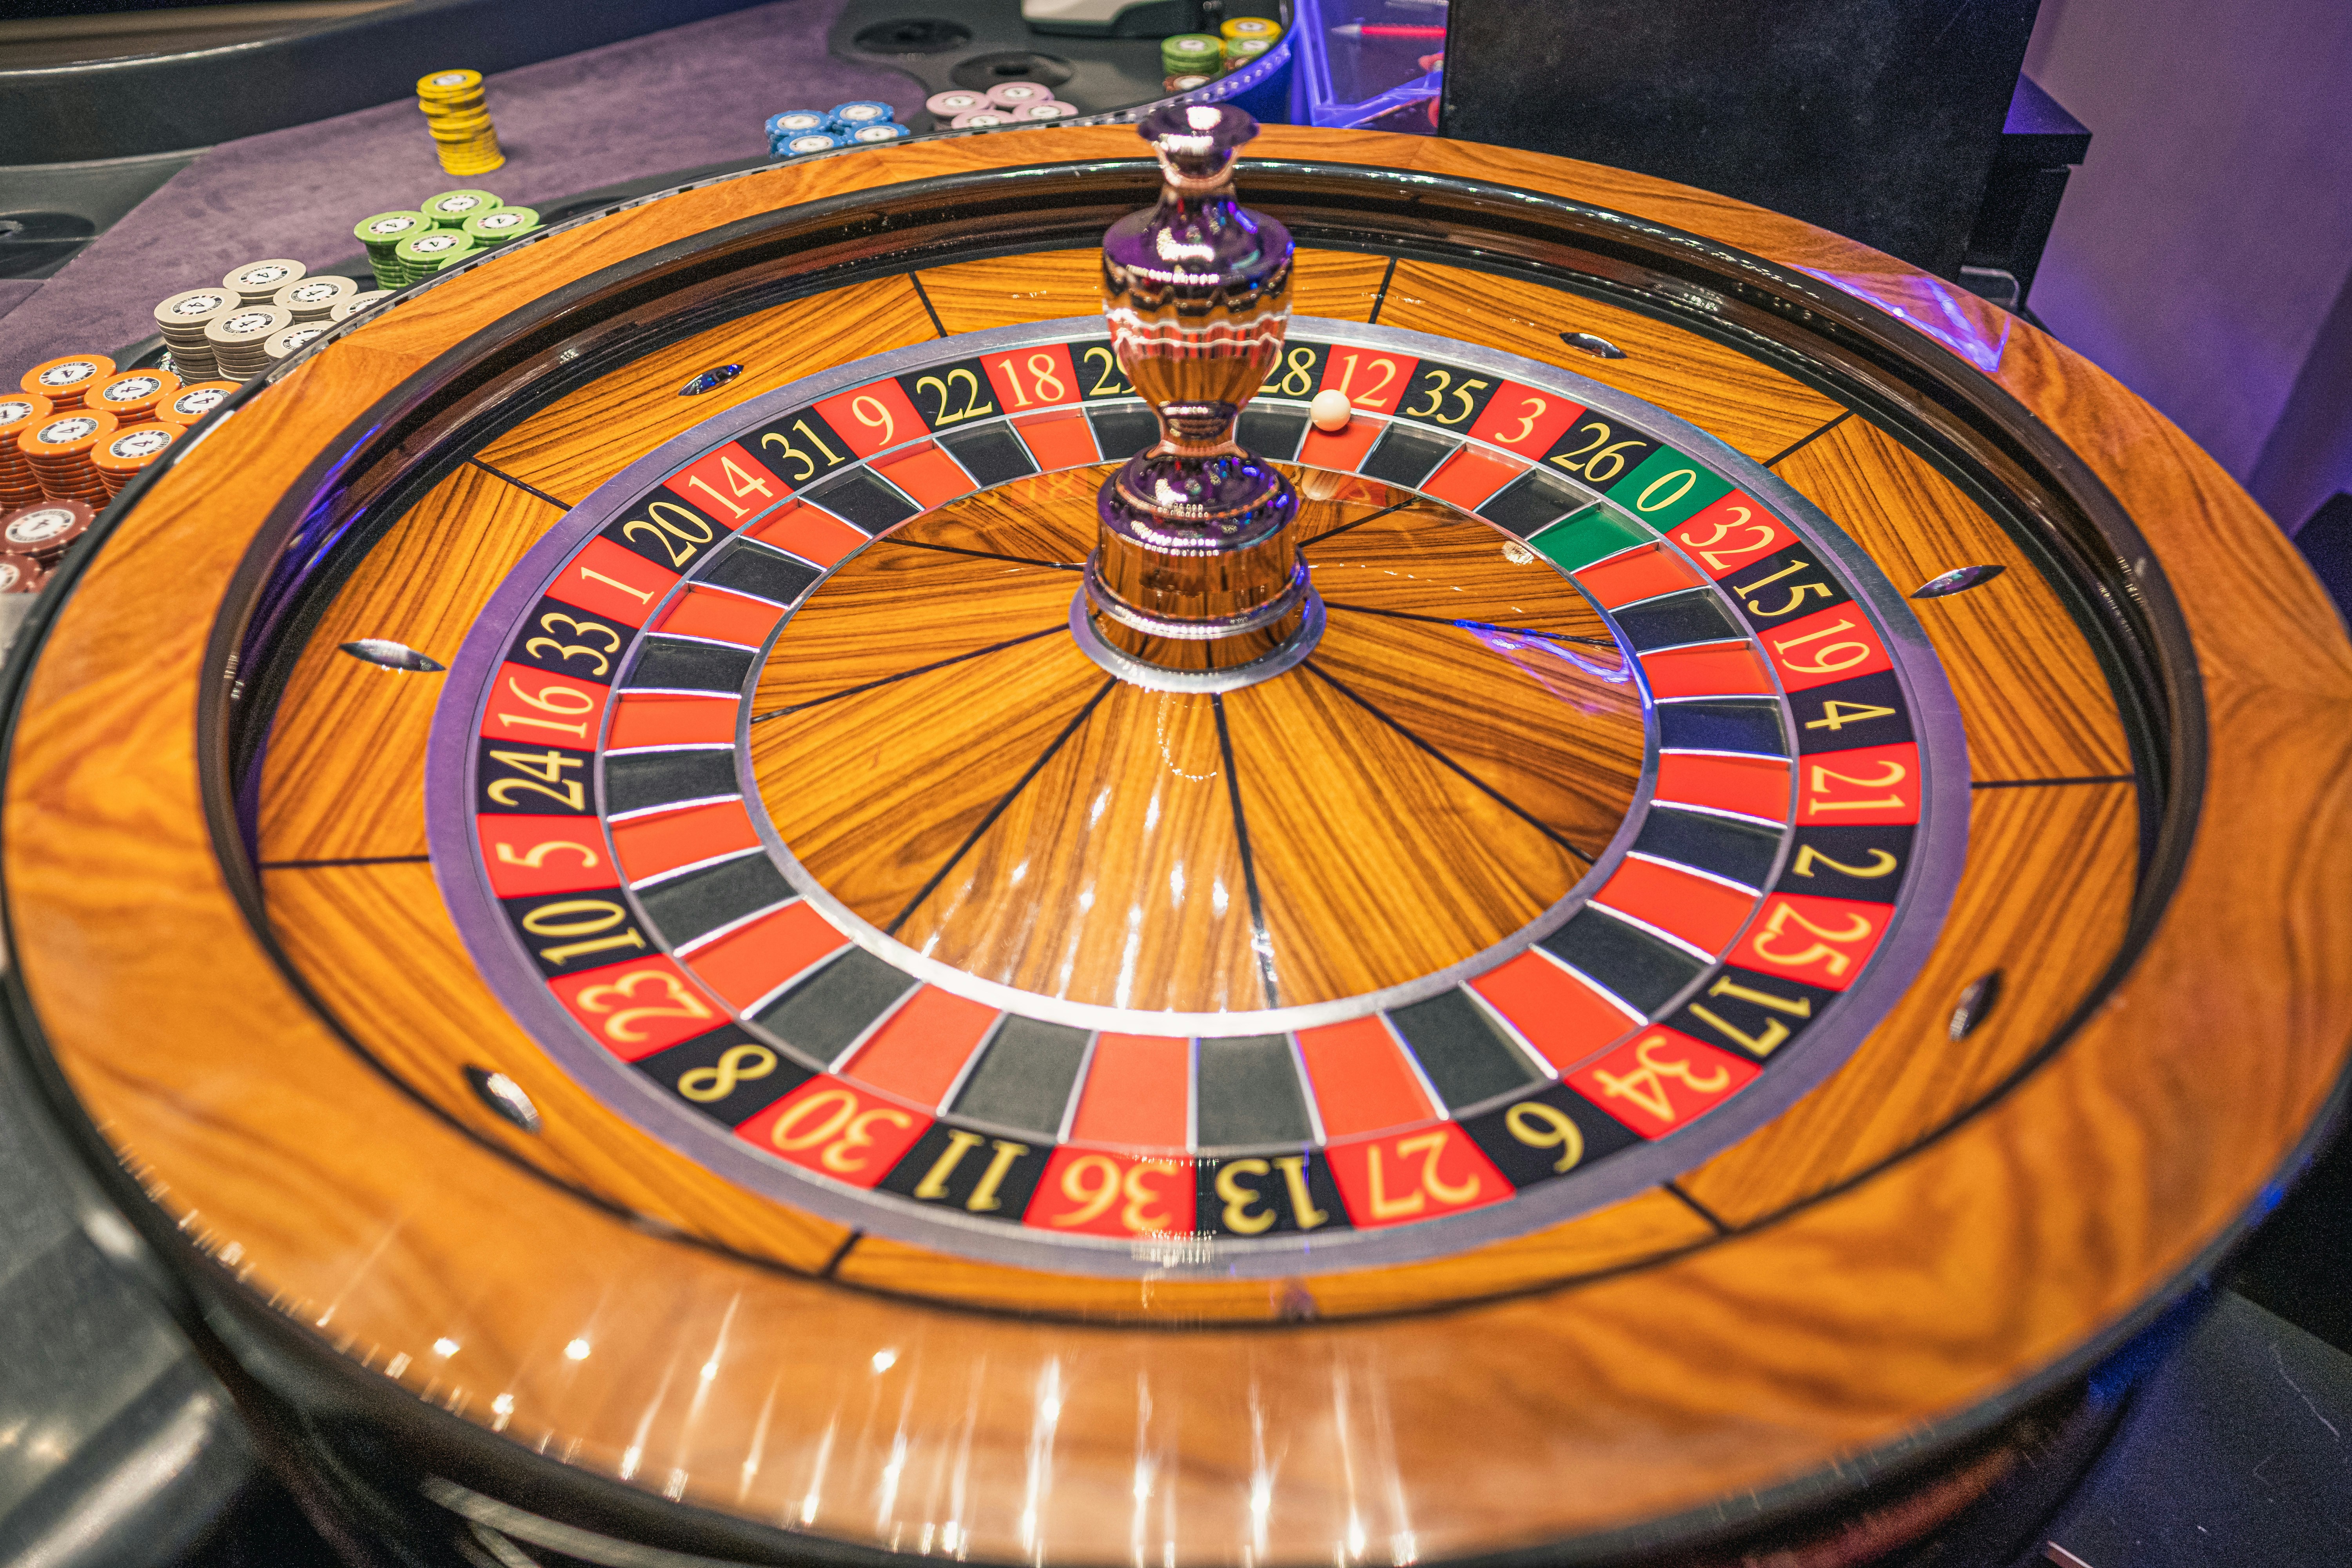 Why Do People Love to Play Roulette, Even If They Don't Know How To